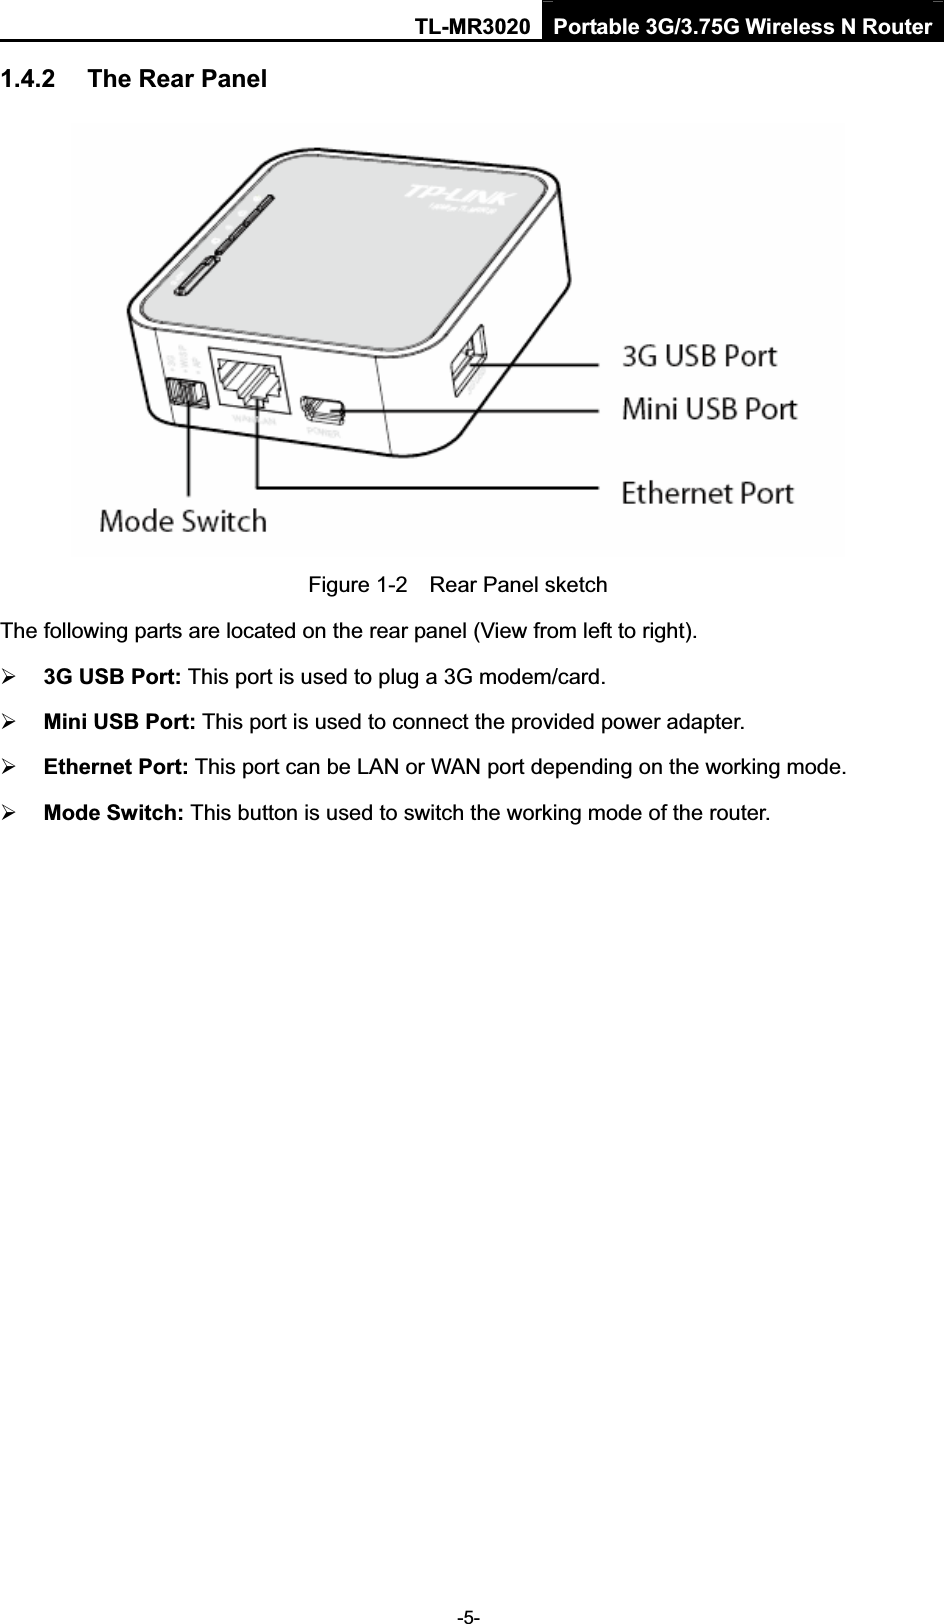 TL-MR3020 Portable 3G/3.75G Wireless N Router-5-1.4.2 The Rear Panel Figure 1-2    Rear Panel sketch The following parts are located on the rear panel (View from left to right). ¾3G USB Port: This port is used to plug a 3G modem/card.   ¾Mini USB Port: This port is used to connect the provided power adapter. ¾Ethernet Port: This port can be LAN or WAN port depending on the working mode. ¾Mode Switch: This button is used to switch the working mode of the router. 